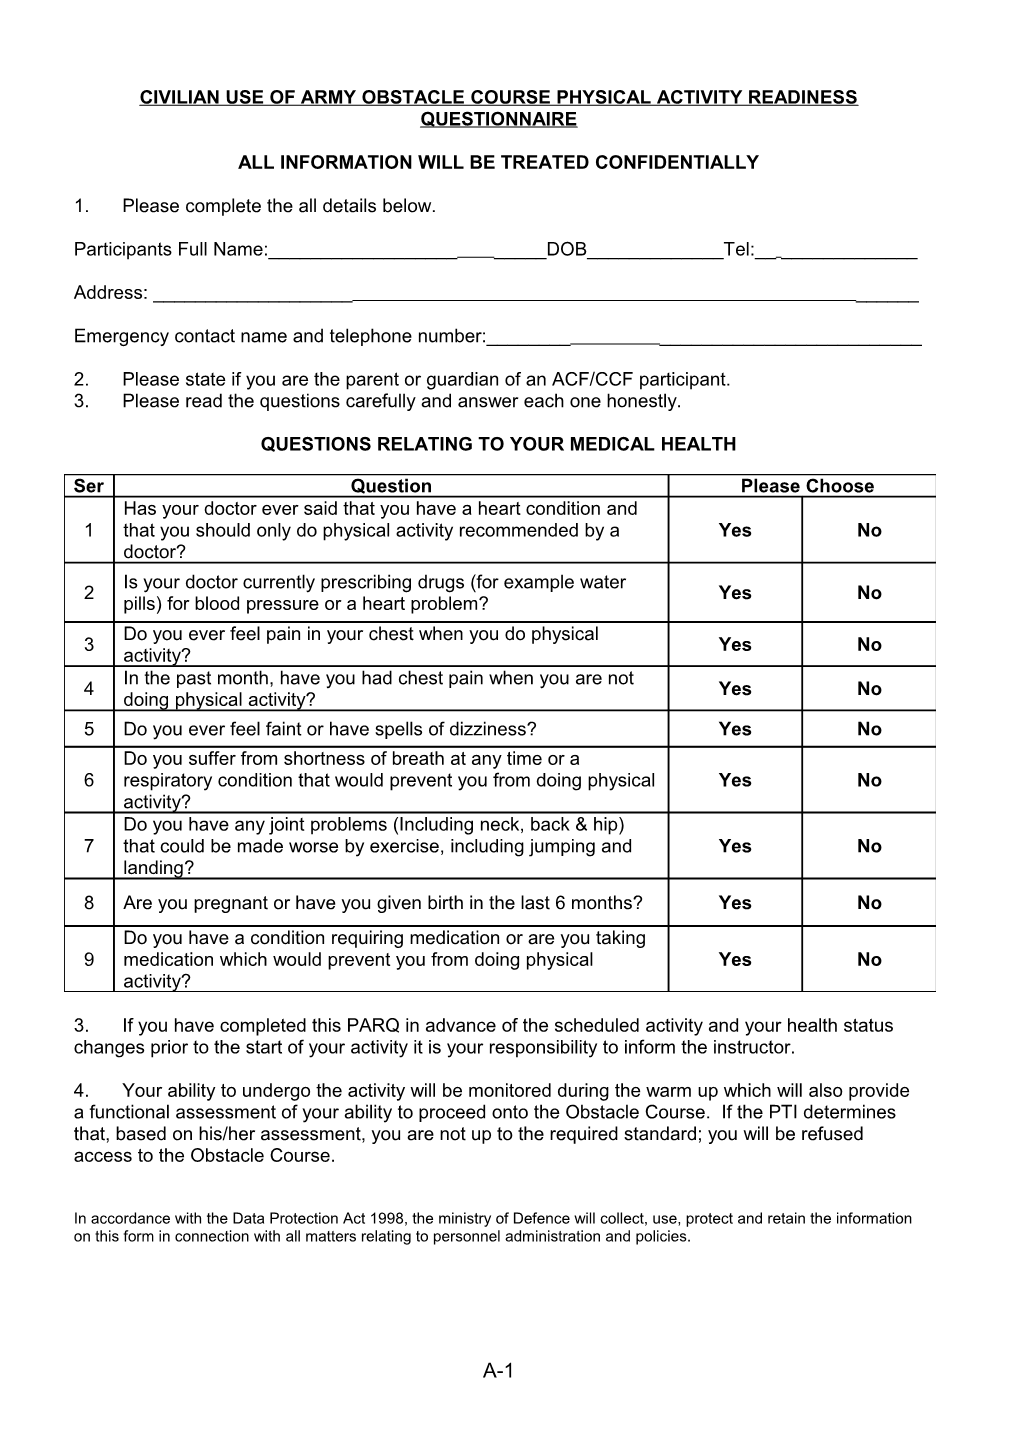 Civilian Use of Army Obstacle Course Physical Activity Readiness Questionnaire